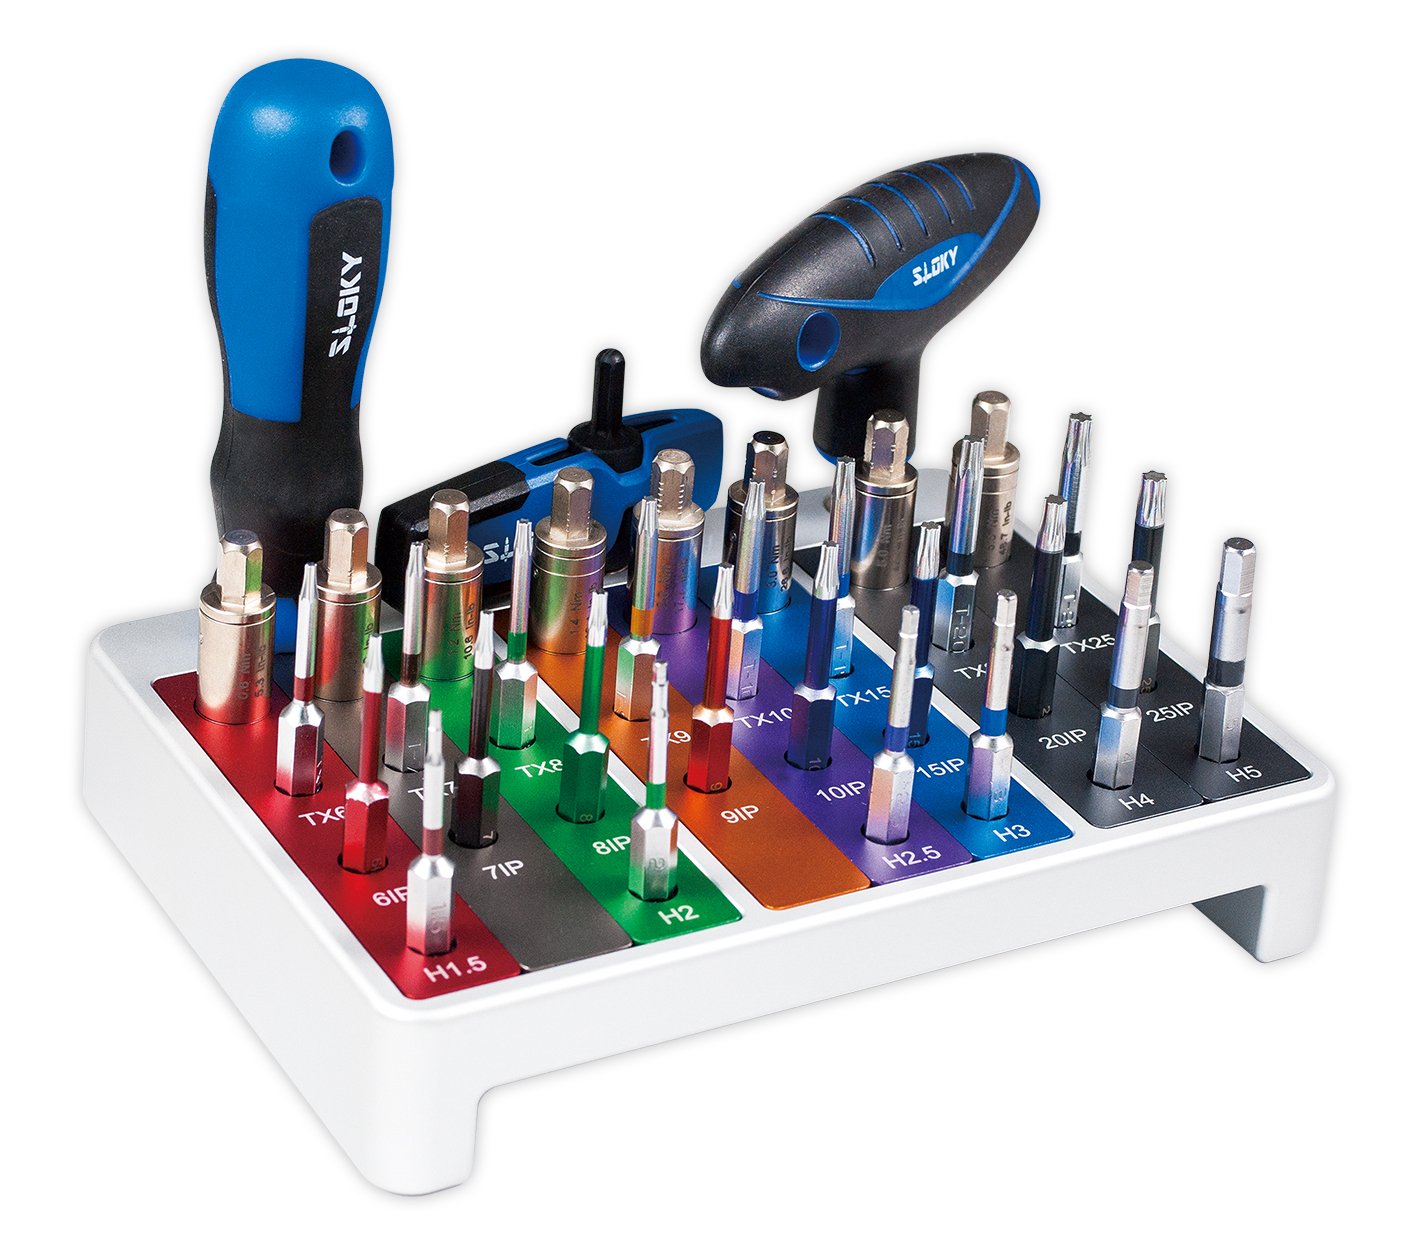 Work Station Sloky torque screwdriver with bits of Hex, Torx and Torx Plus for different Nm torque adapters.
User friendly for CNC cutting tool of machining, turning and milling.